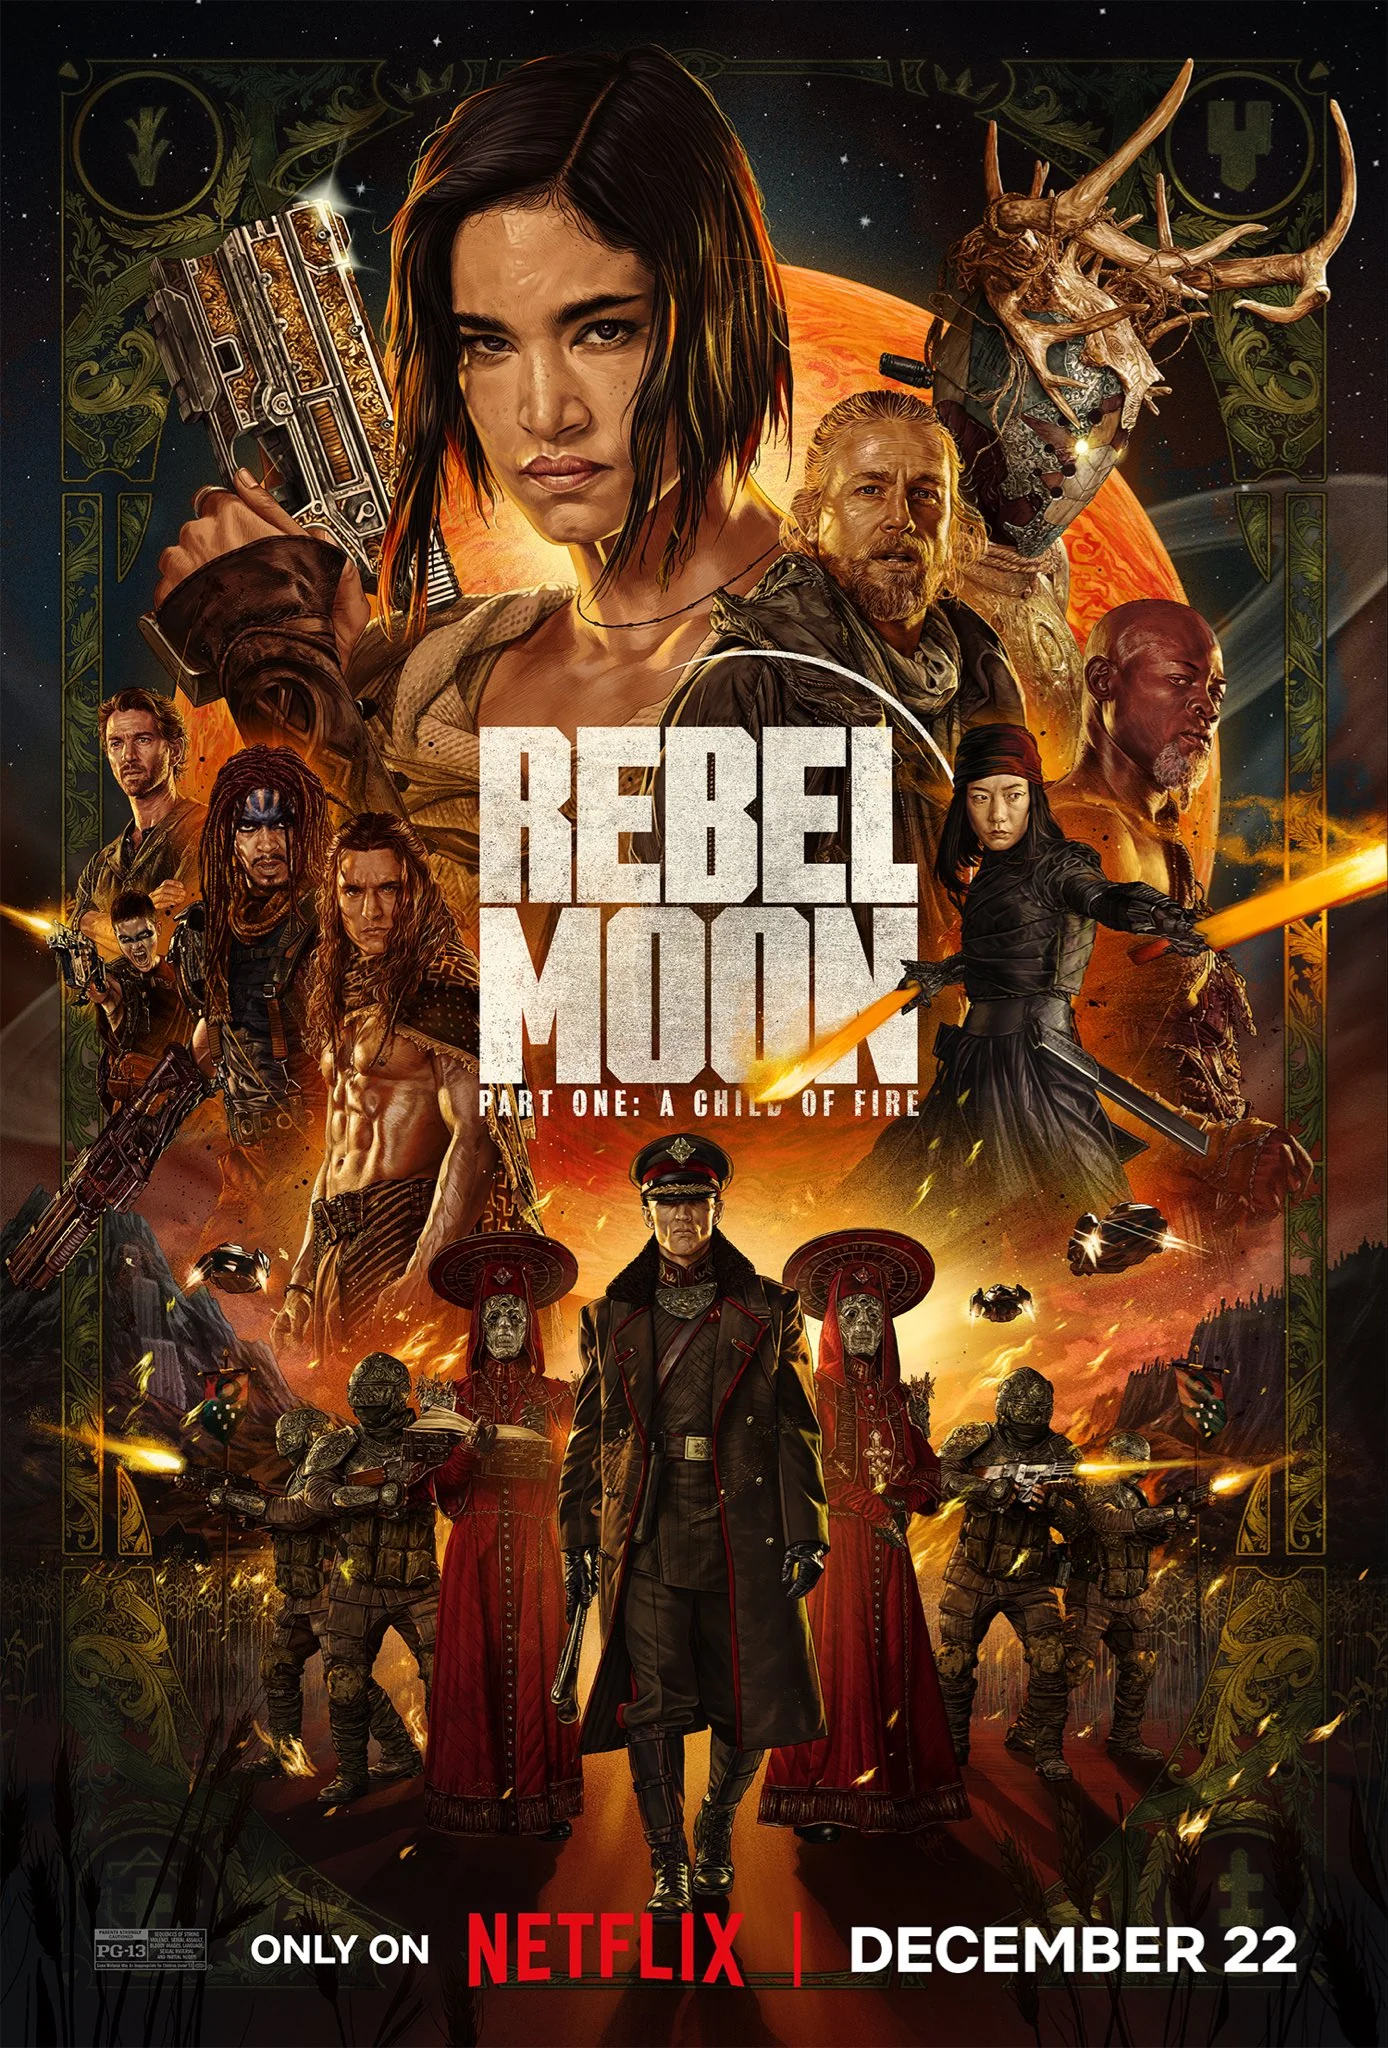 official-poster-for-rebel-moon-part-one-a-child-of-fire-v0-0oubvl63yo3c1